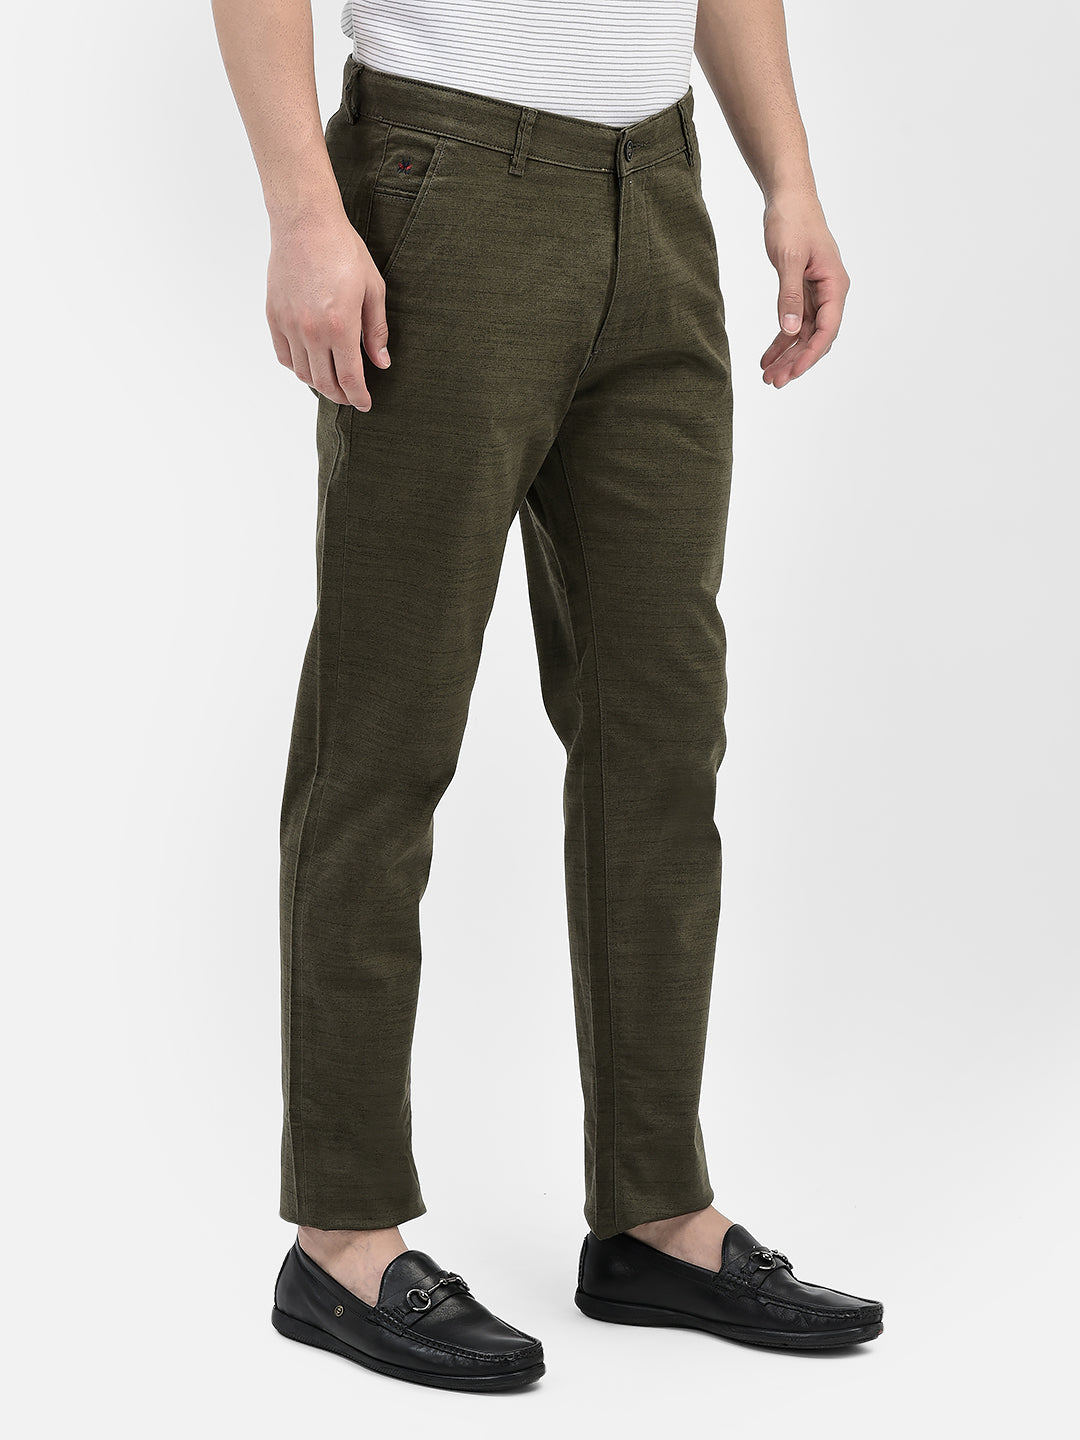 Olive Printed Chinos Trousers-Men Trousers-Crimsoune Club